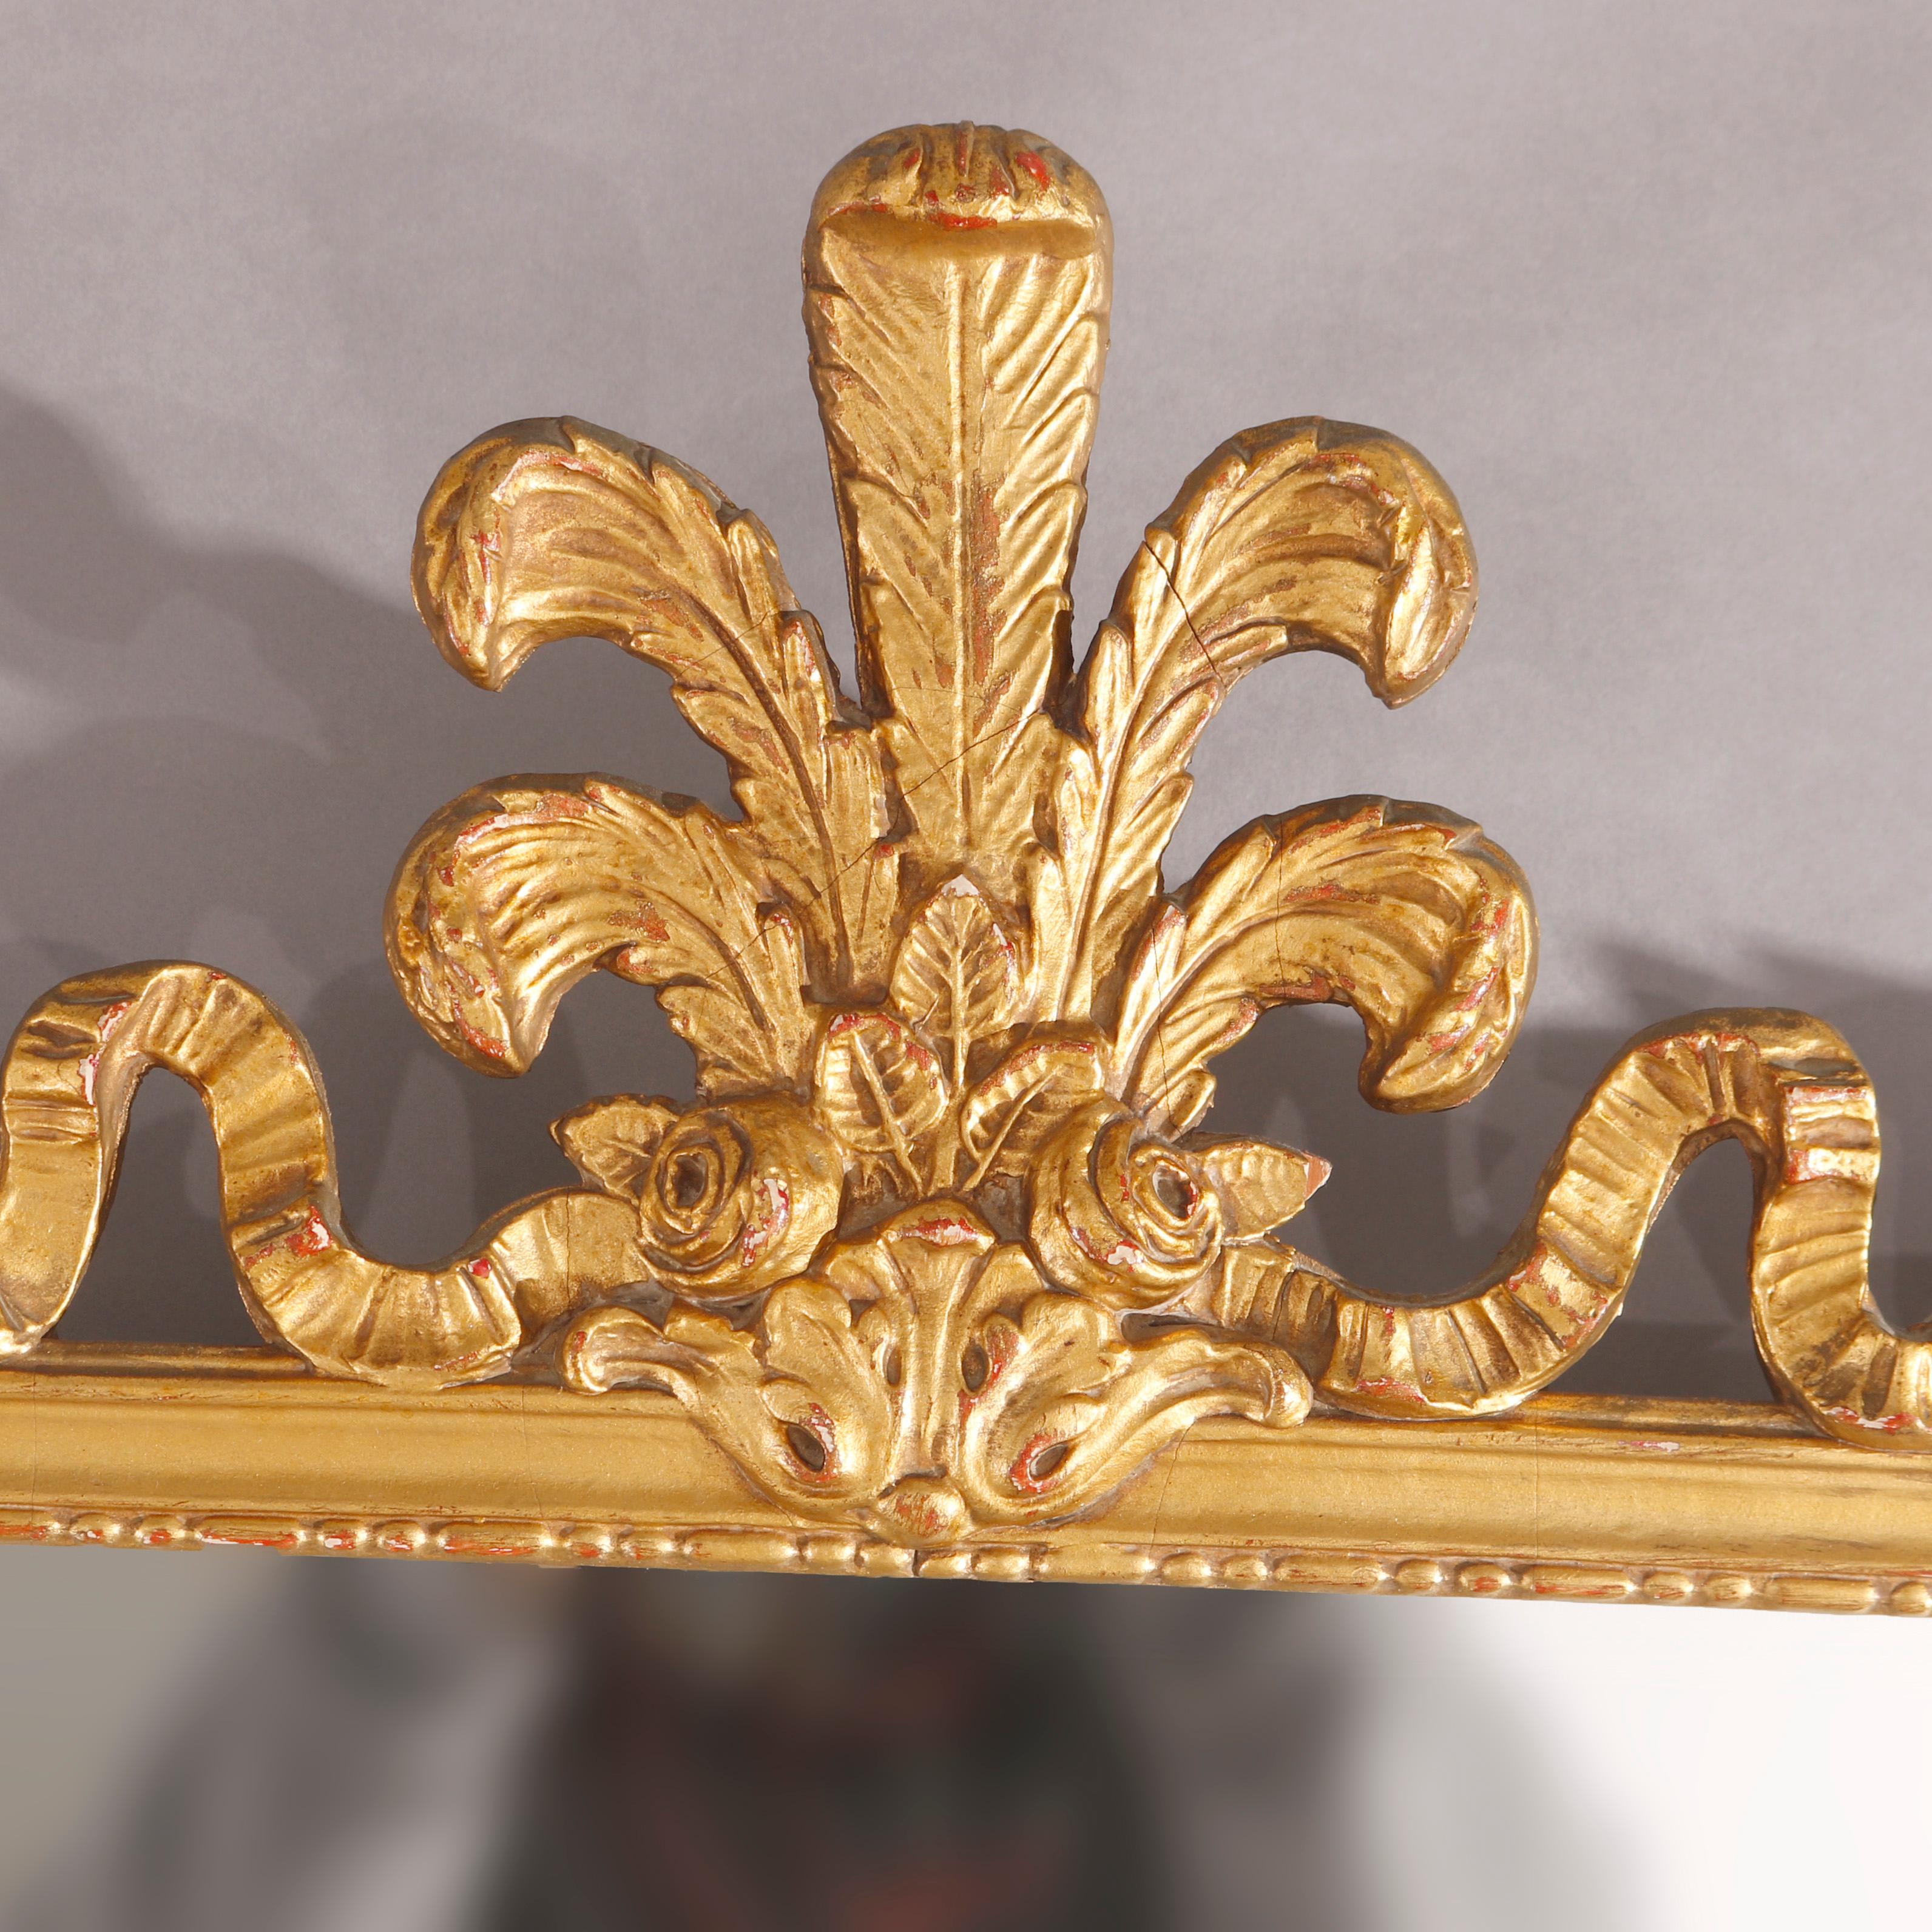 An antique French style wall mirror offers giltwood construction with fleur de lis crest over frame with foliate and scroll elements, c1920

Measures - 34